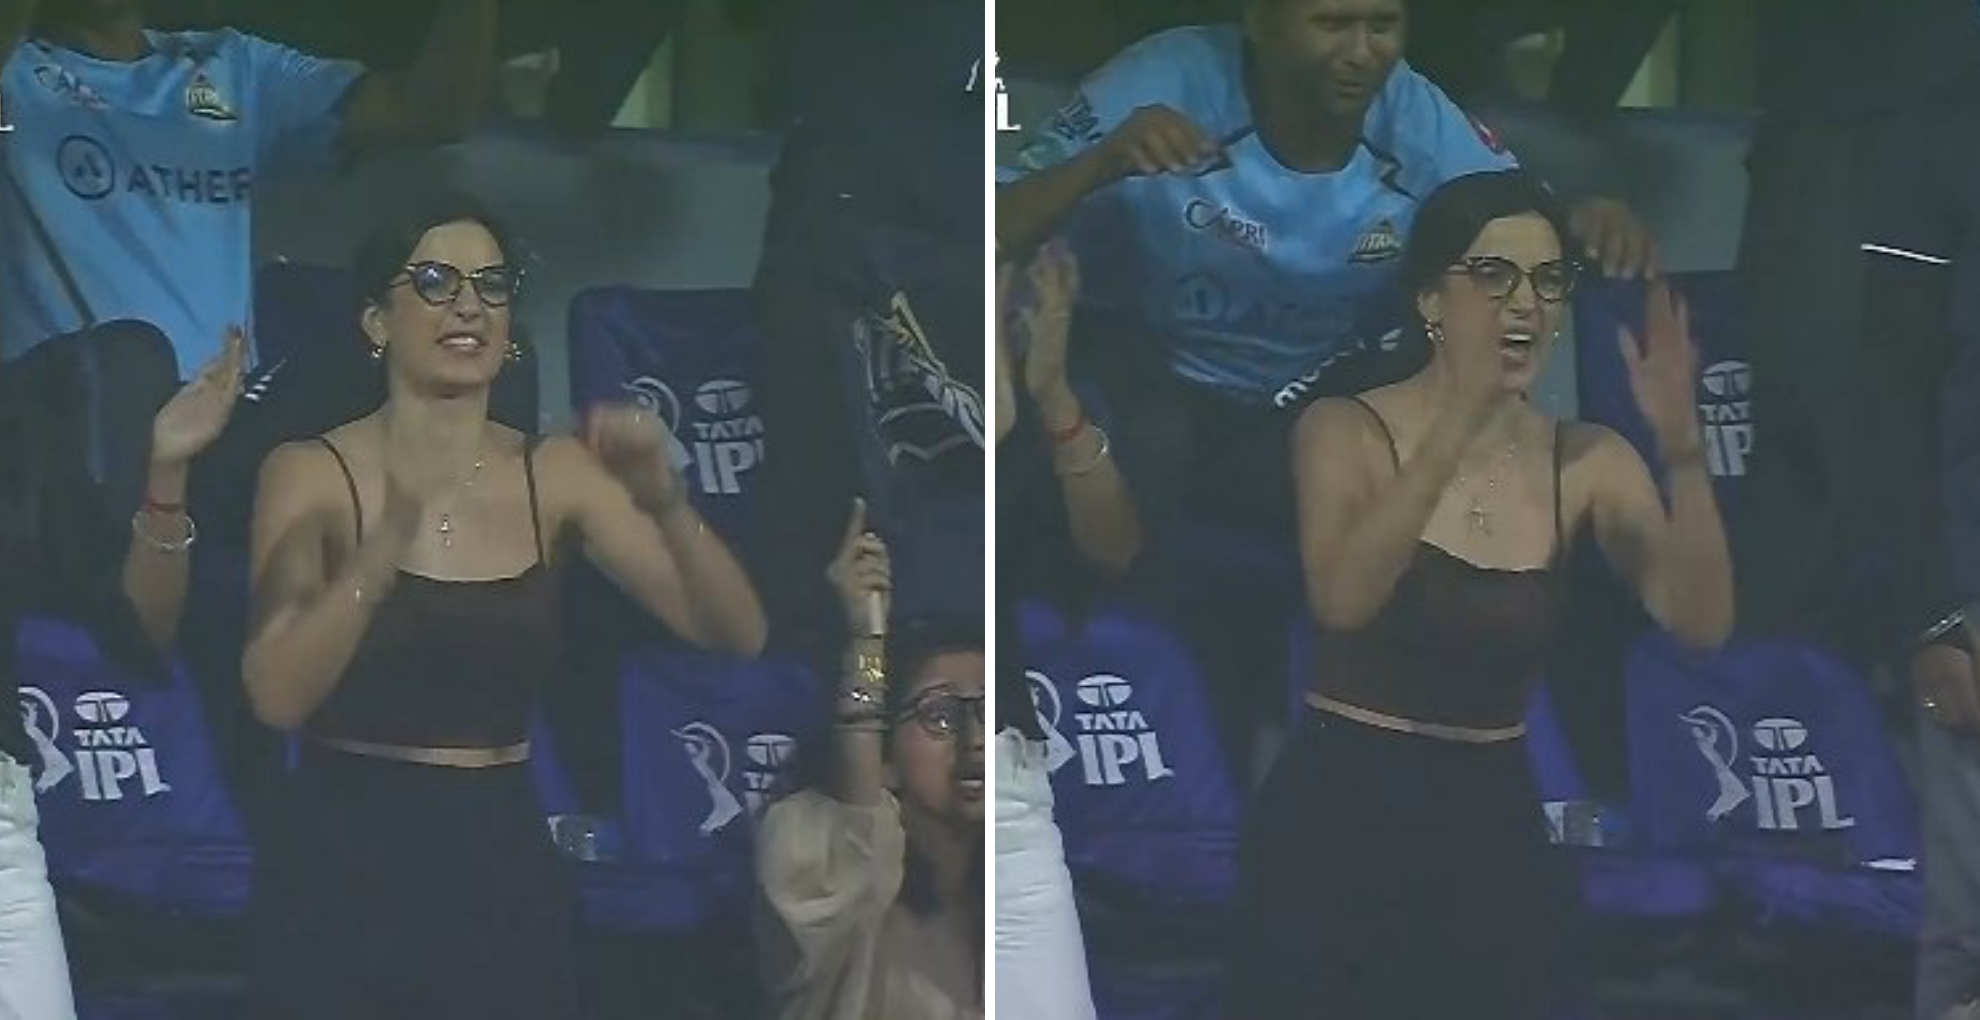 [Watch] Hardik Pandya’s Wife Natasa Stankovic Expresses Disappointment After A Wicket; Video Goes Viral